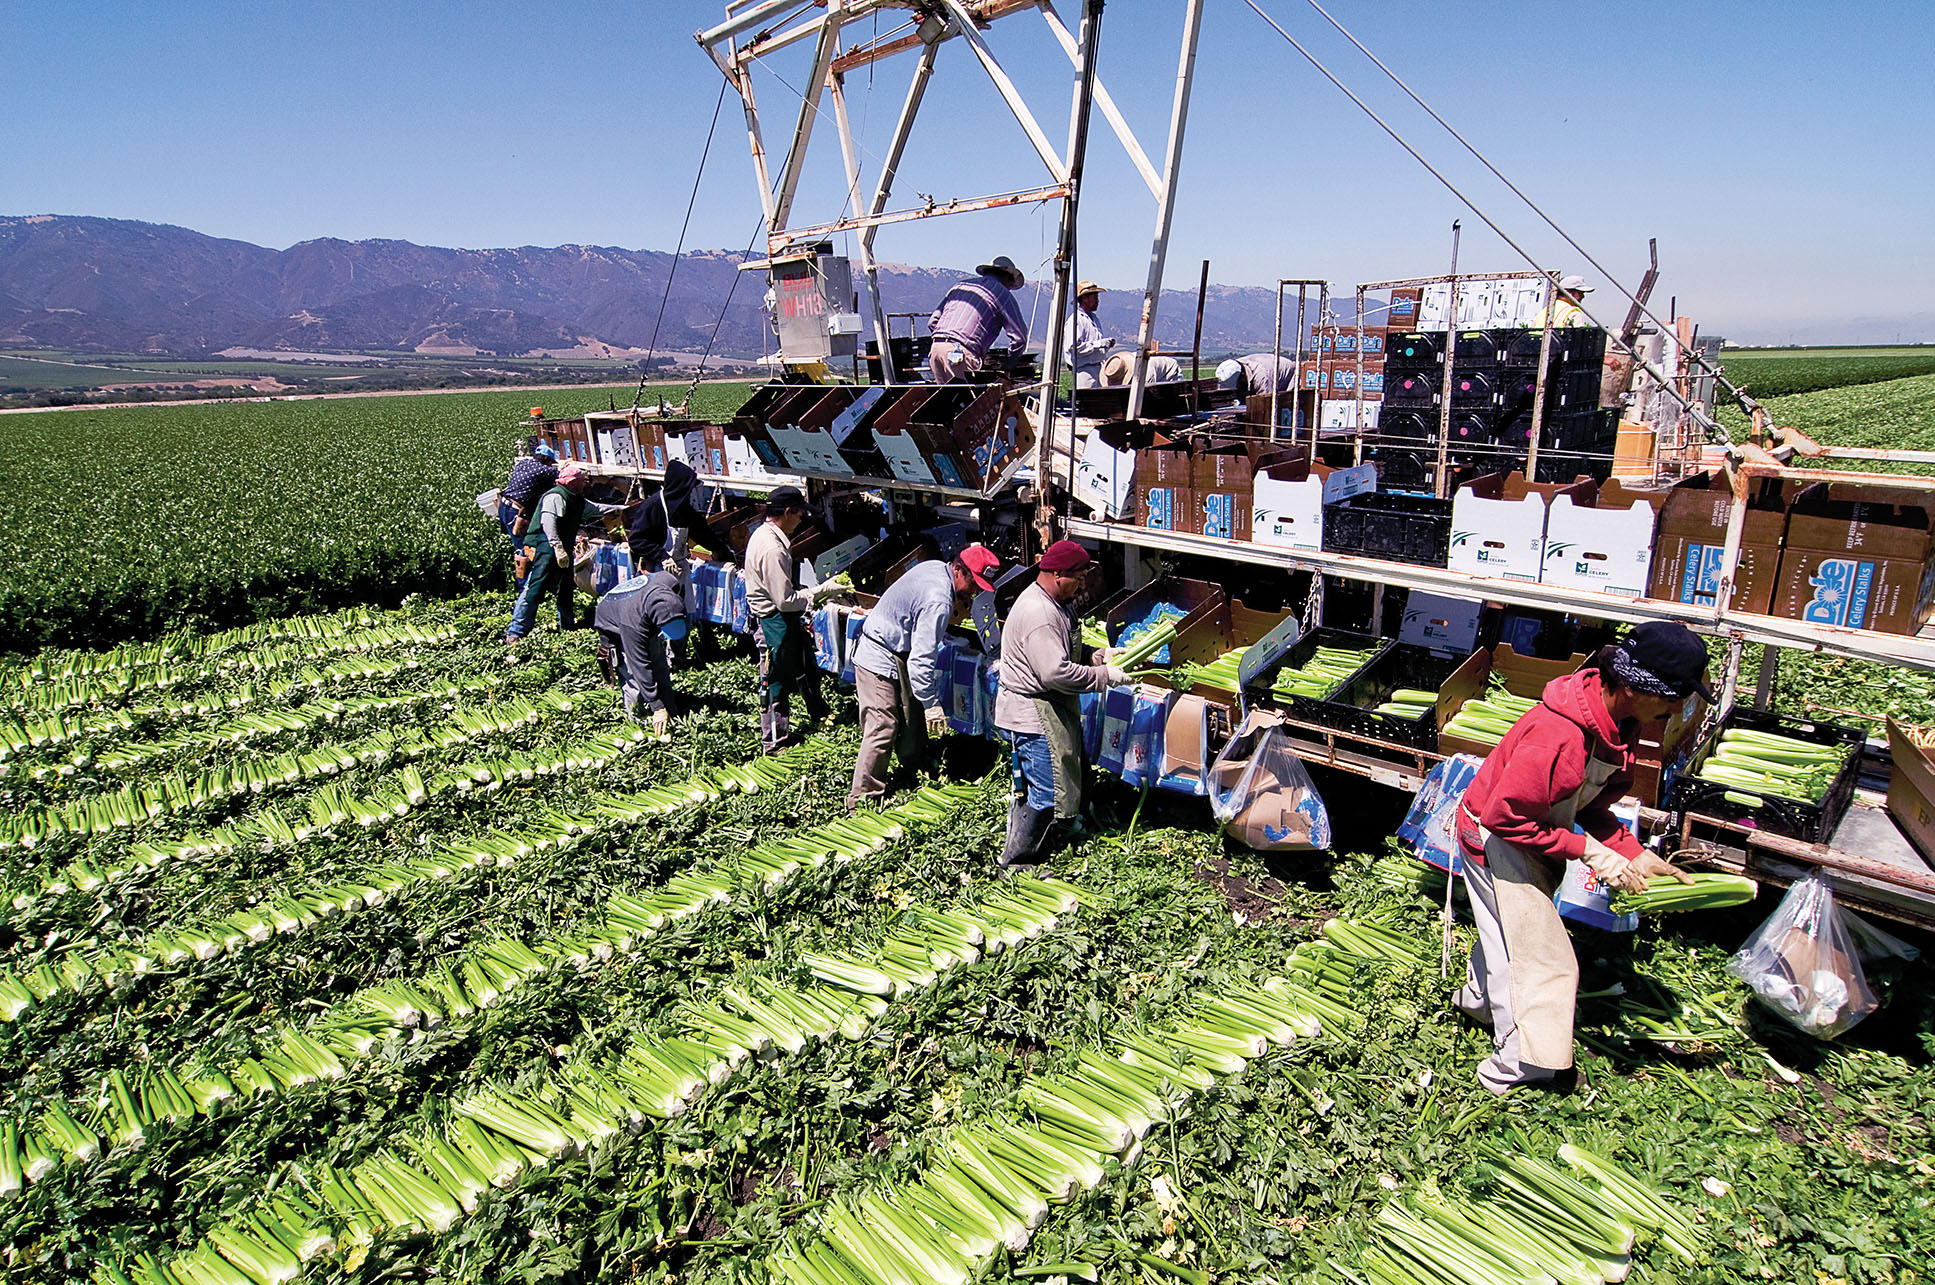 Migrant workers follow along a combine to cut and pack a celery field in the Salinas Valley. (Photo by Dan Long.)